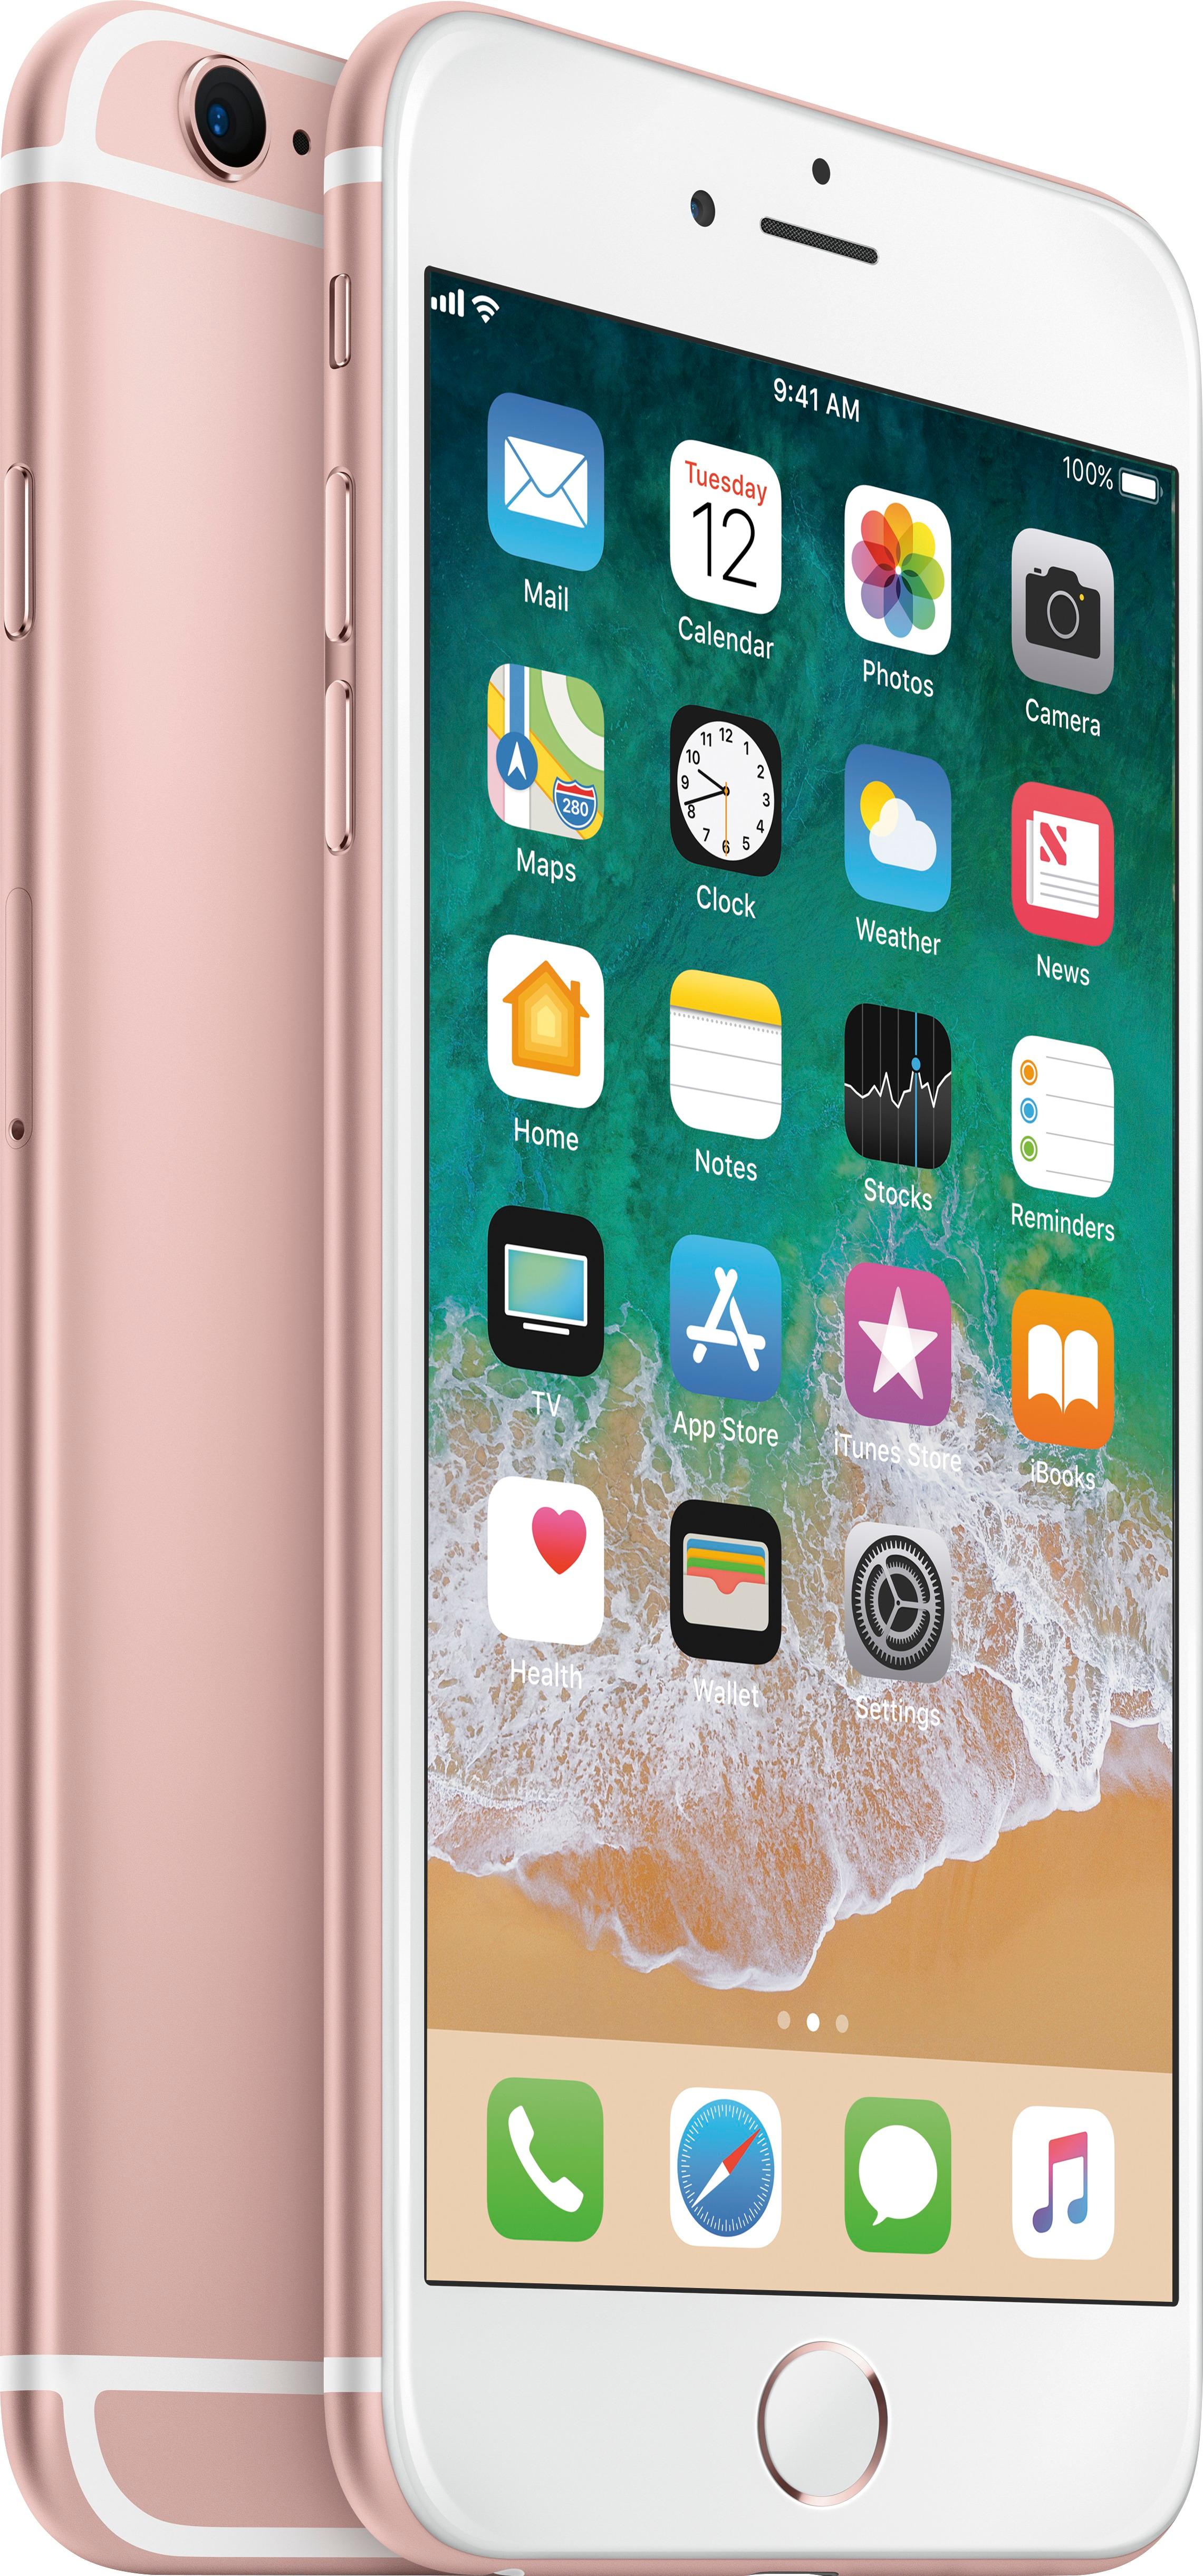 Customer Reviews Apple PreOwned (Excellent) iPhone 6s Plus 4G LTE